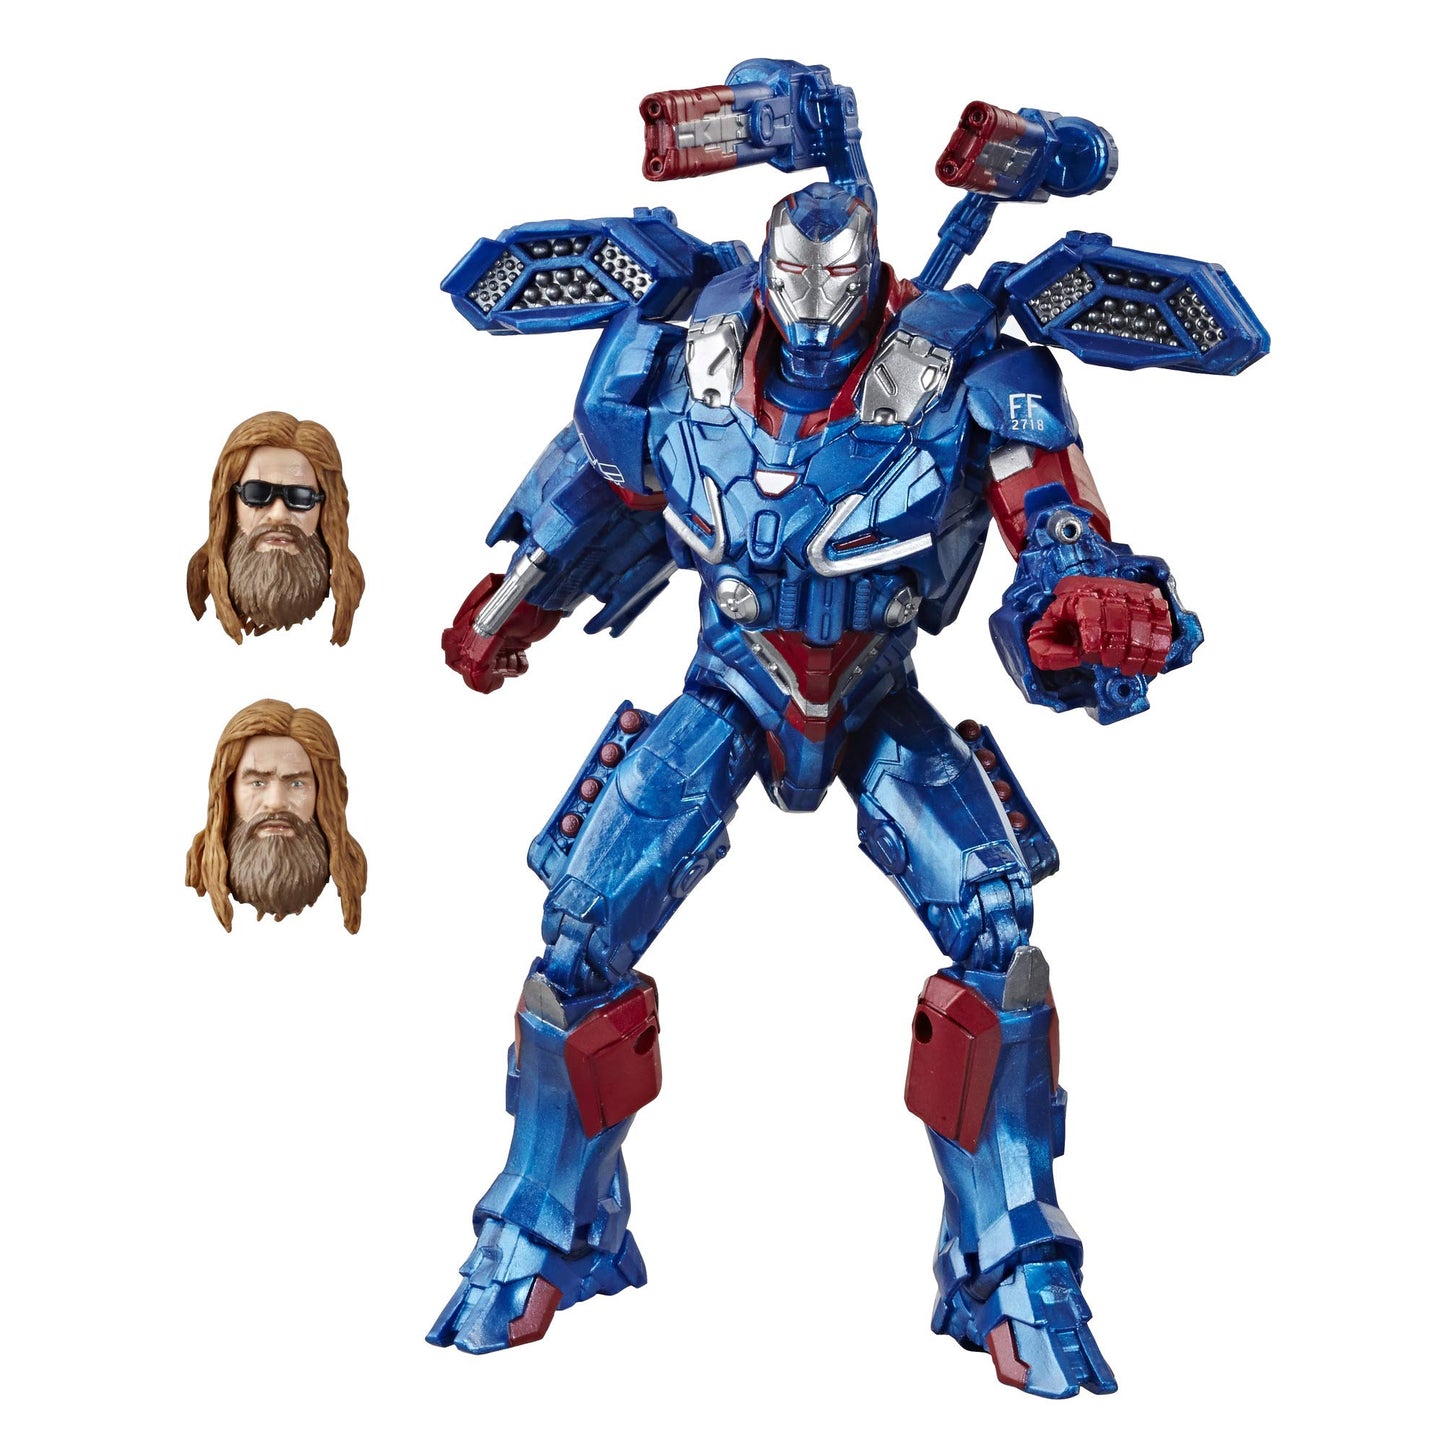 Avengers Marvel Legends Series Endgame 6" Collectible Action Figure Iron Patriot Collection, Includes 4 Accessories